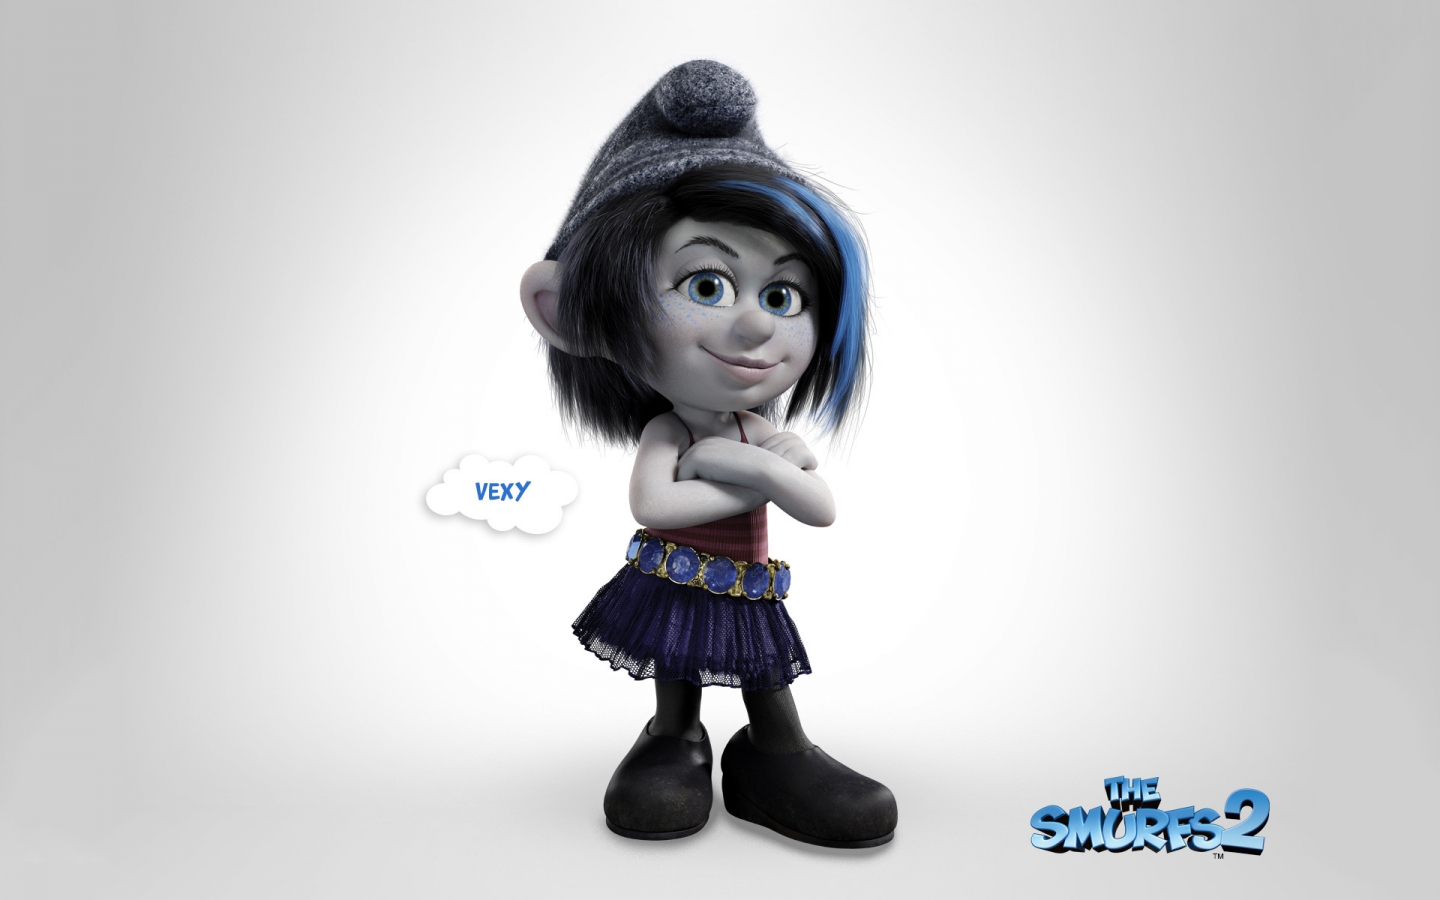 Vexy The Smurfs 2 for 1440 x 900 widescreen resolution